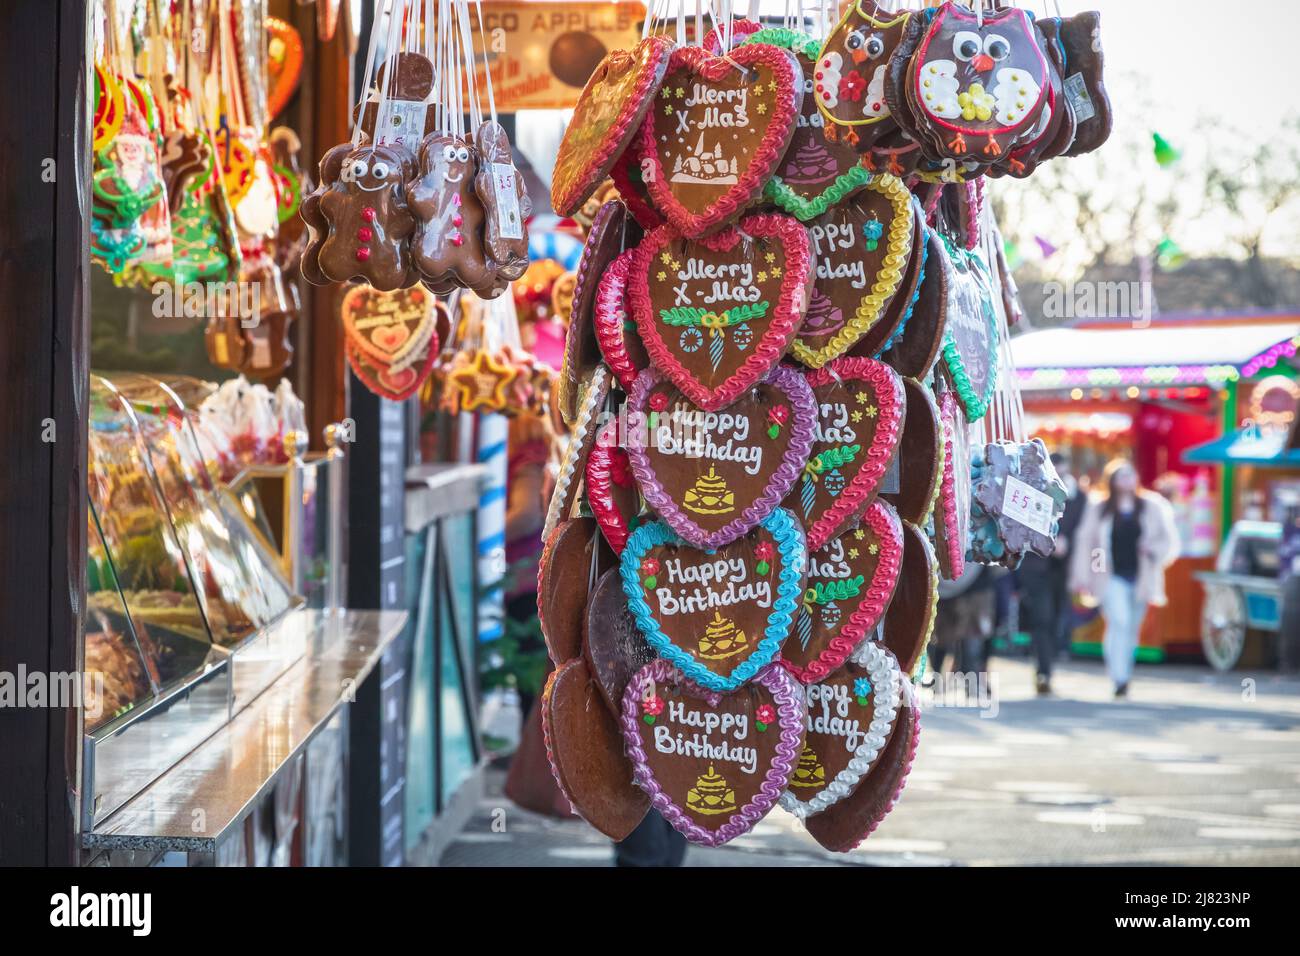 London, UK - November 28, 2021 - Gingerbread biscuit on display at a confectionery stall of Christmas market Hyde Park Winter Wonderland Stock Photo